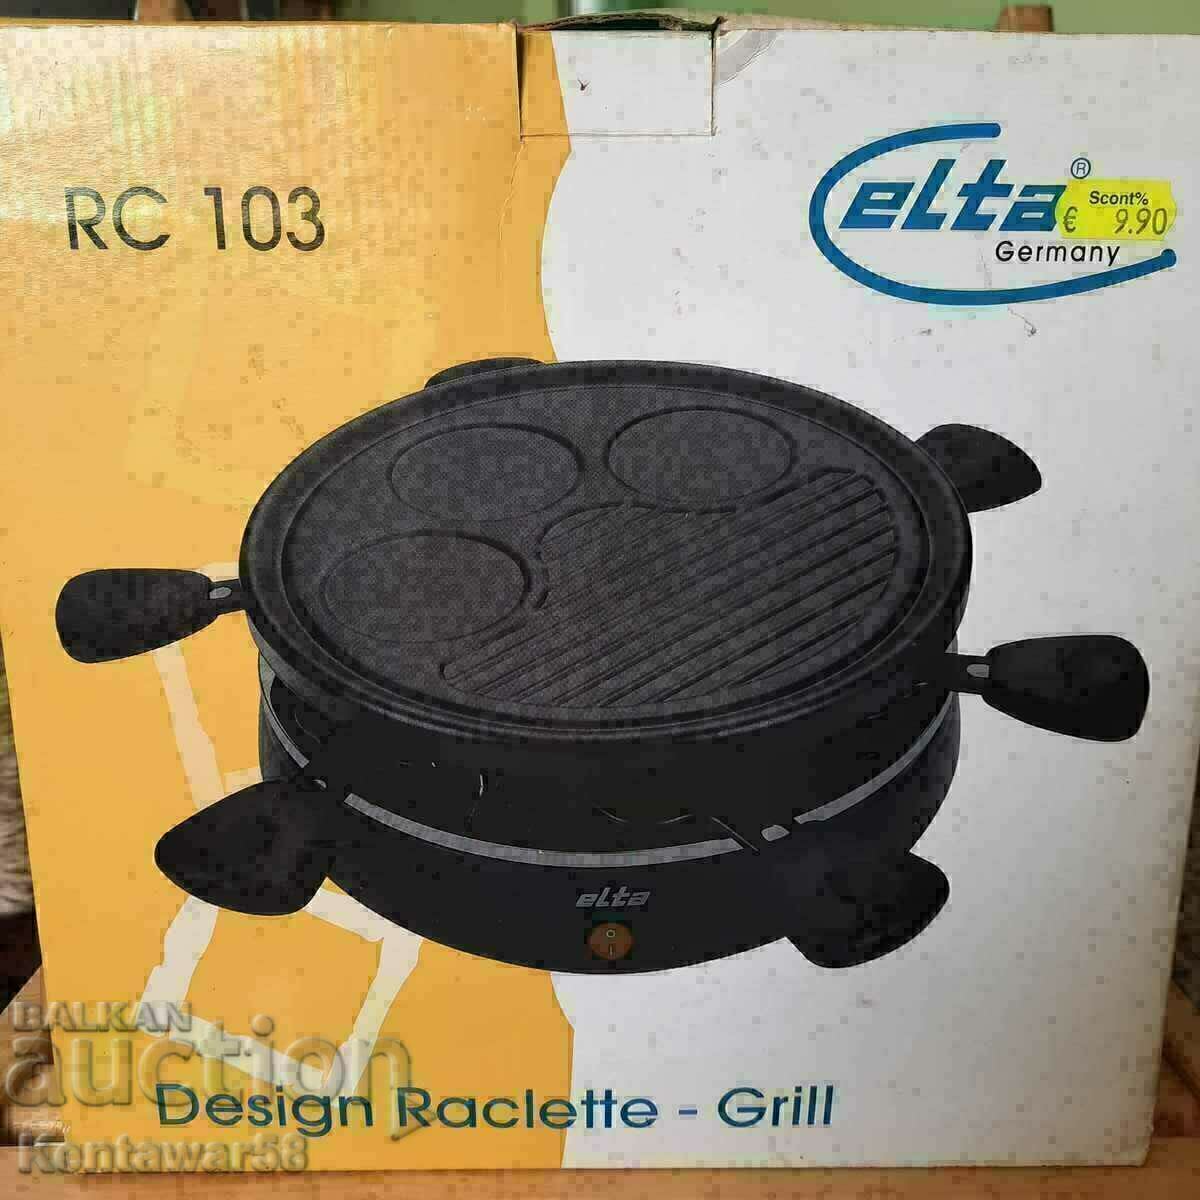 Party grill 3 in 1 - raclette grill.